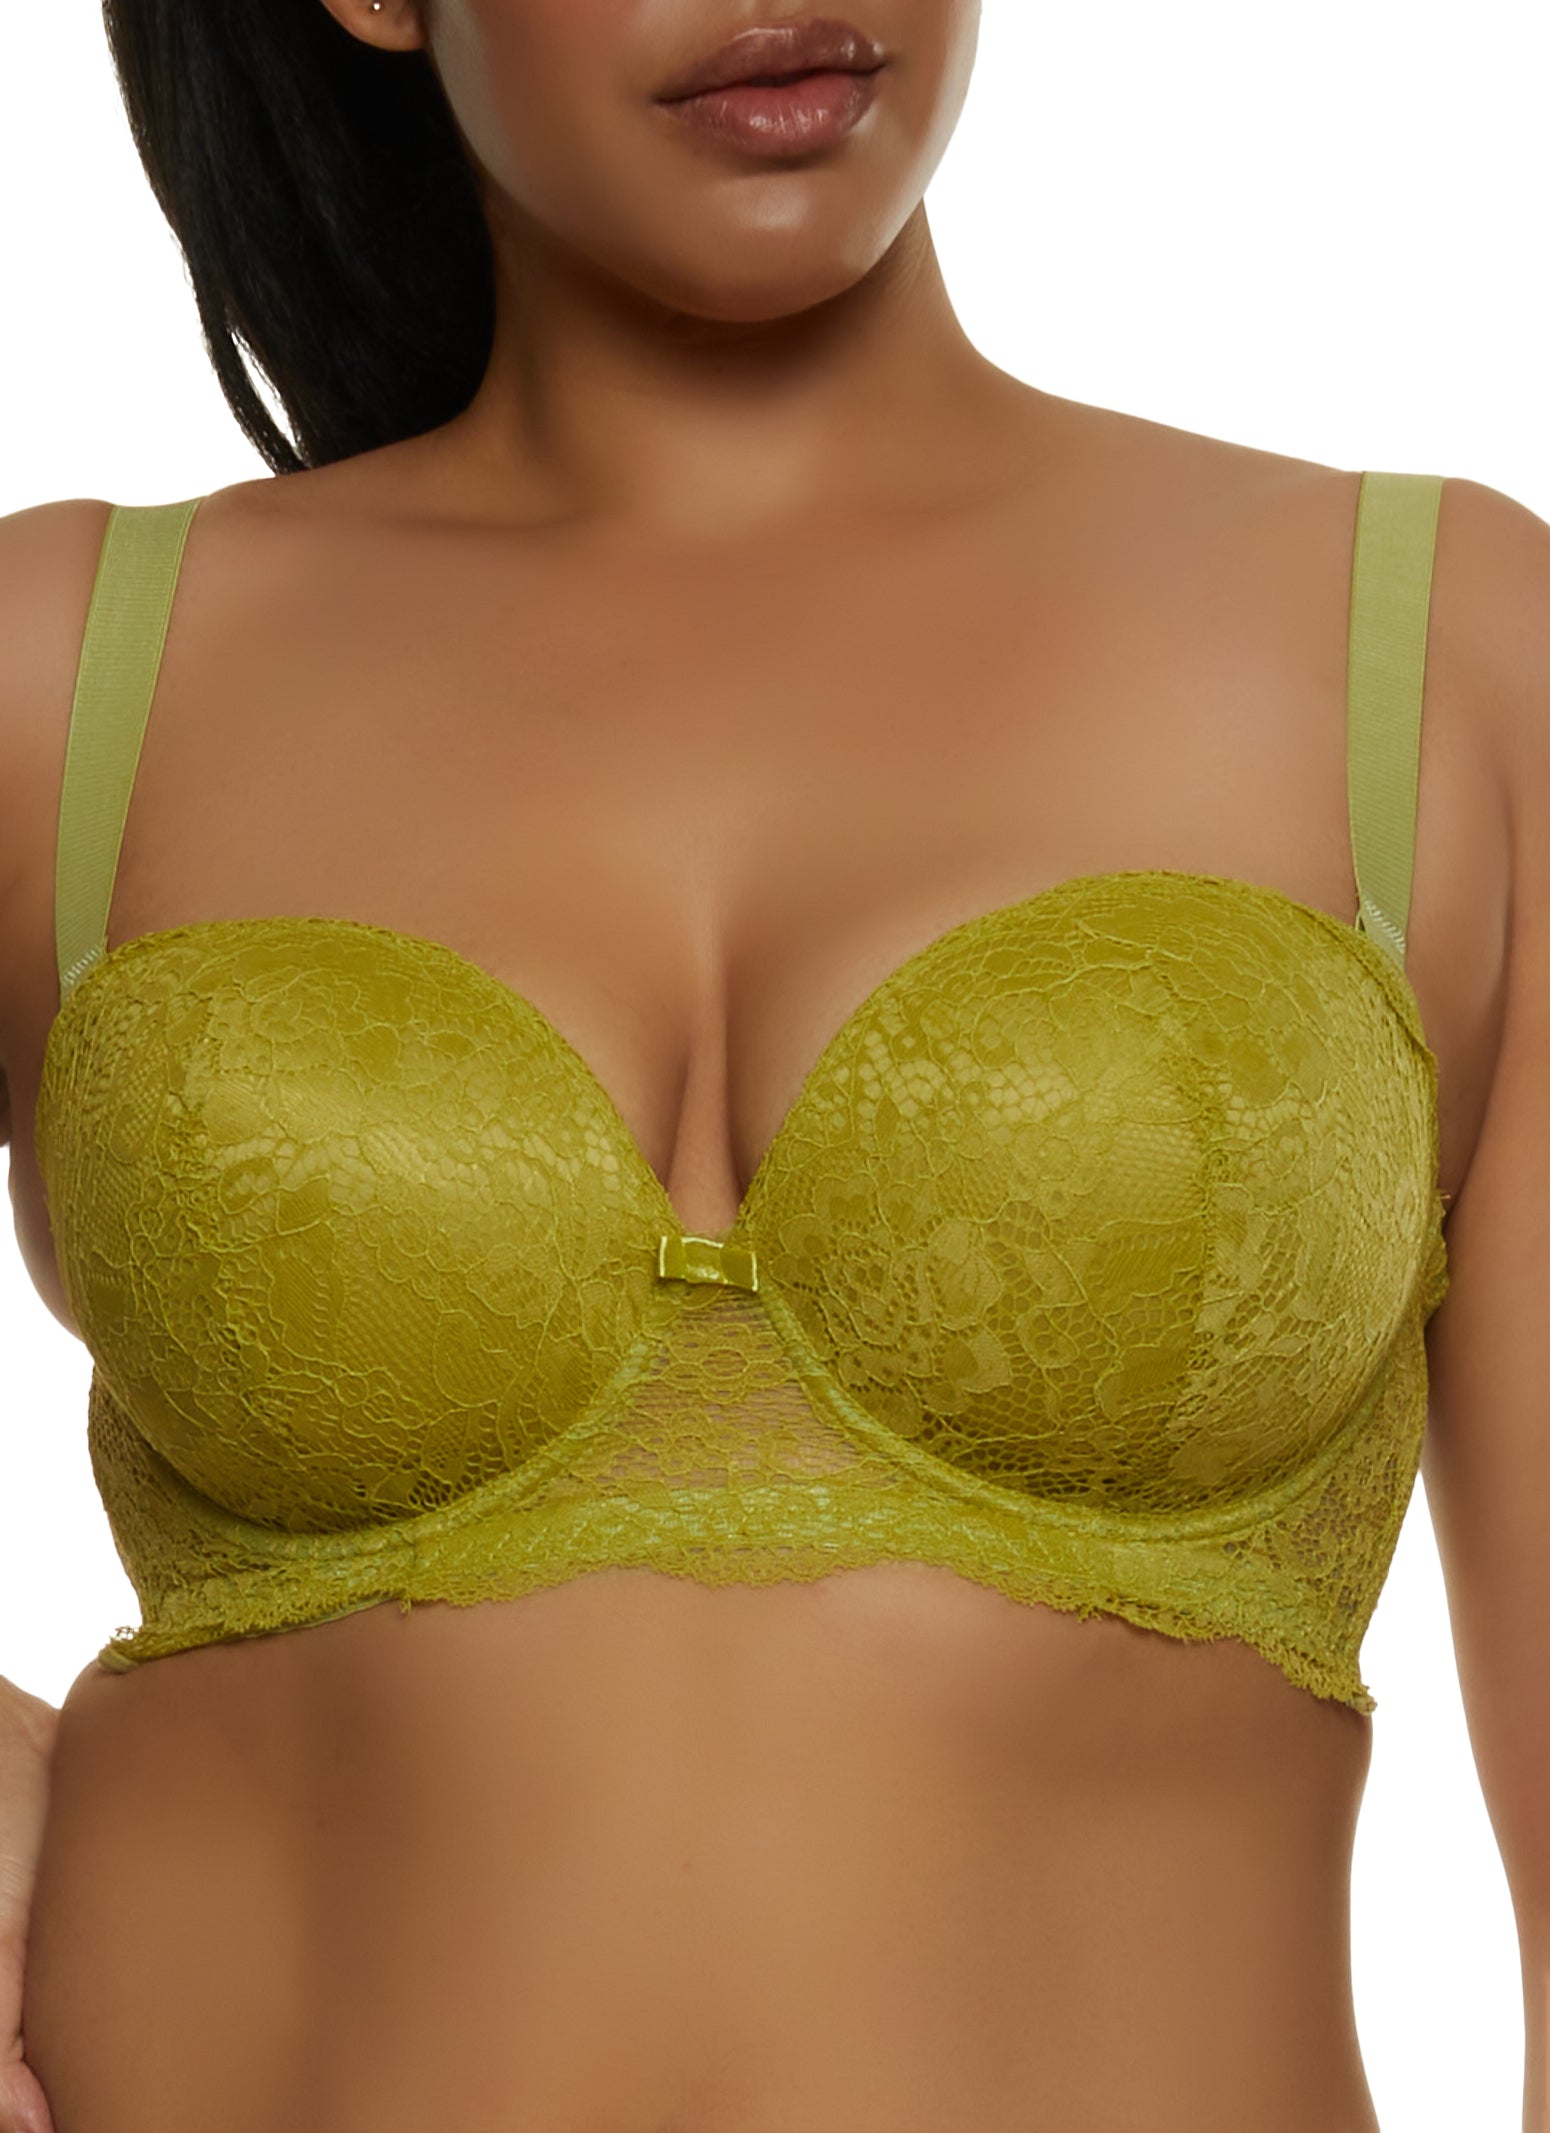 Rainbow Shops Womens Plus Size Scalloped Floral Lace Balconette Bra, Converts to Strapless, Green, Size 44C